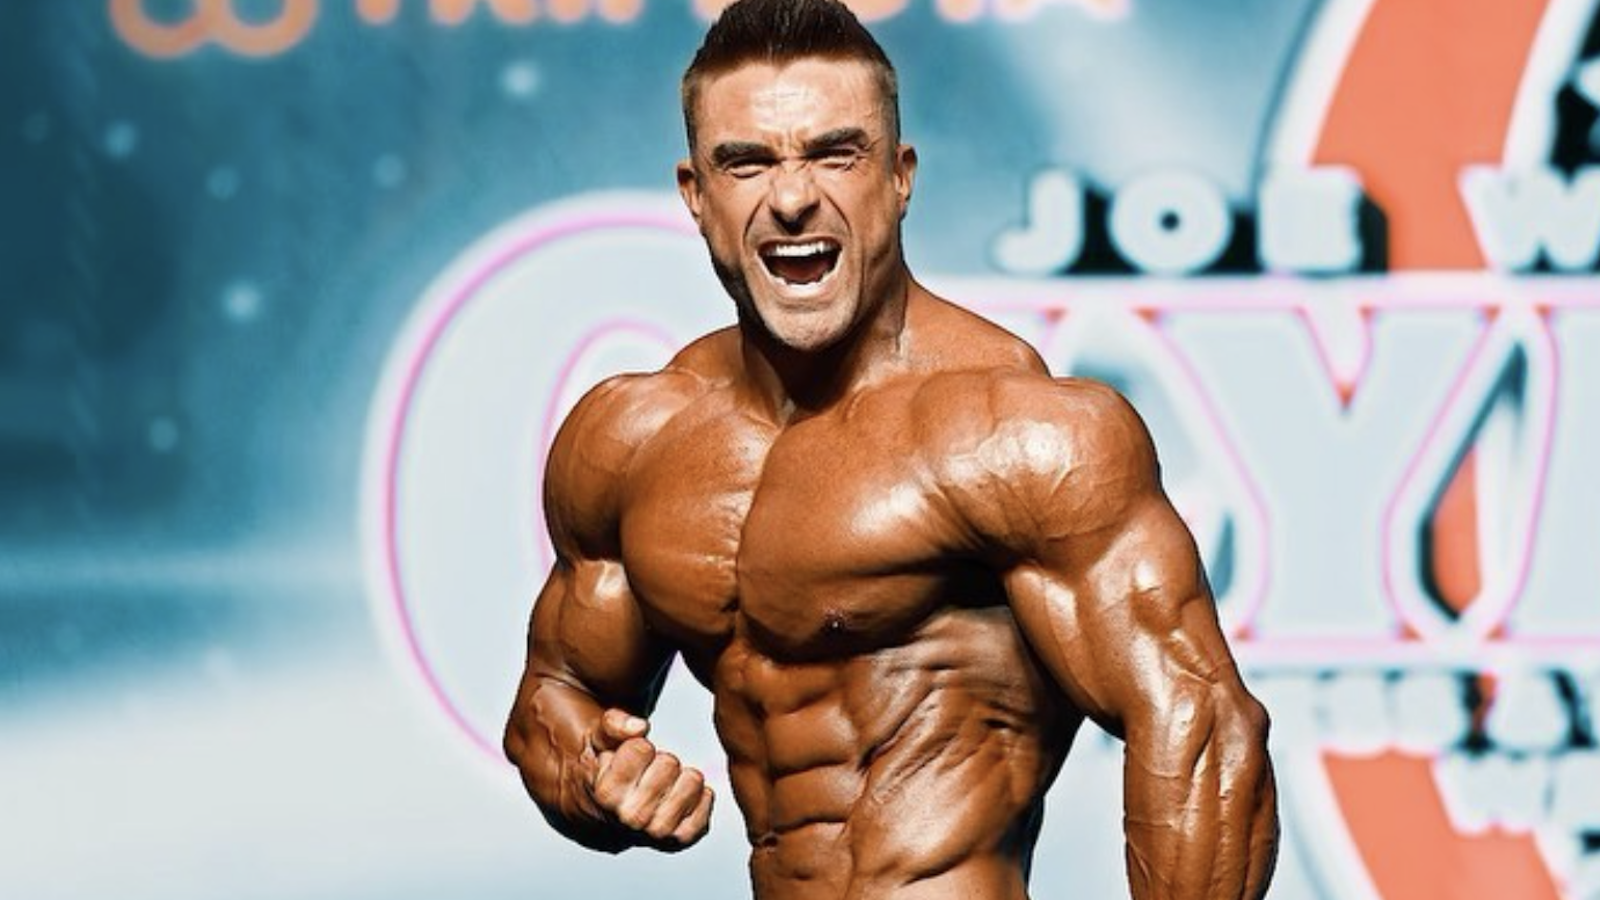 Ryan Terry Wins 2023 Men's Physique Olympia